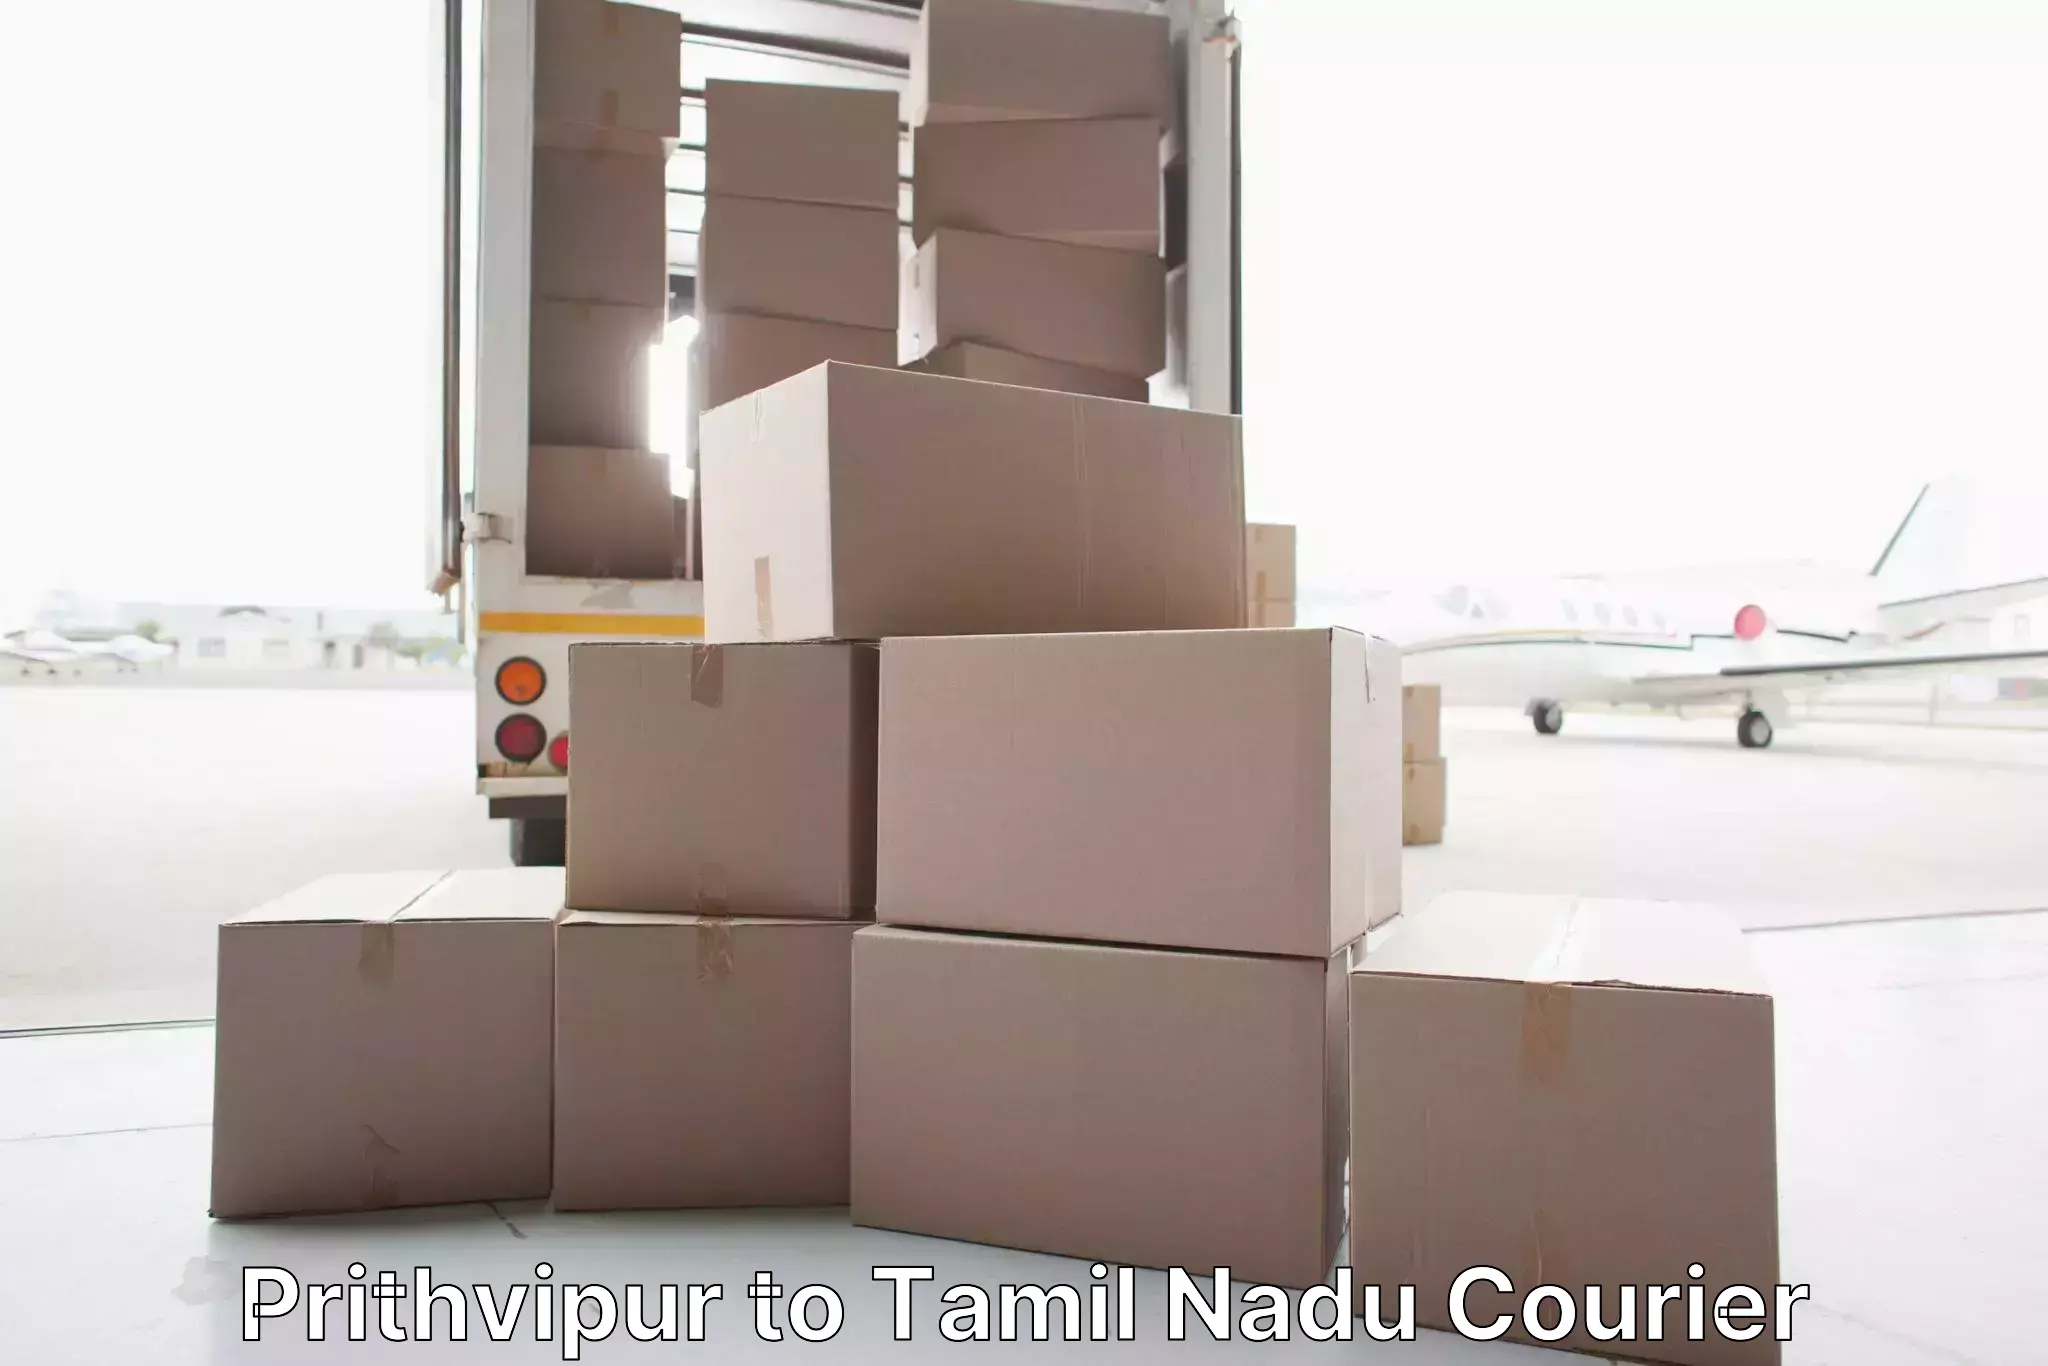 Flexible moving solutions in Prithvipur to Udumalpet